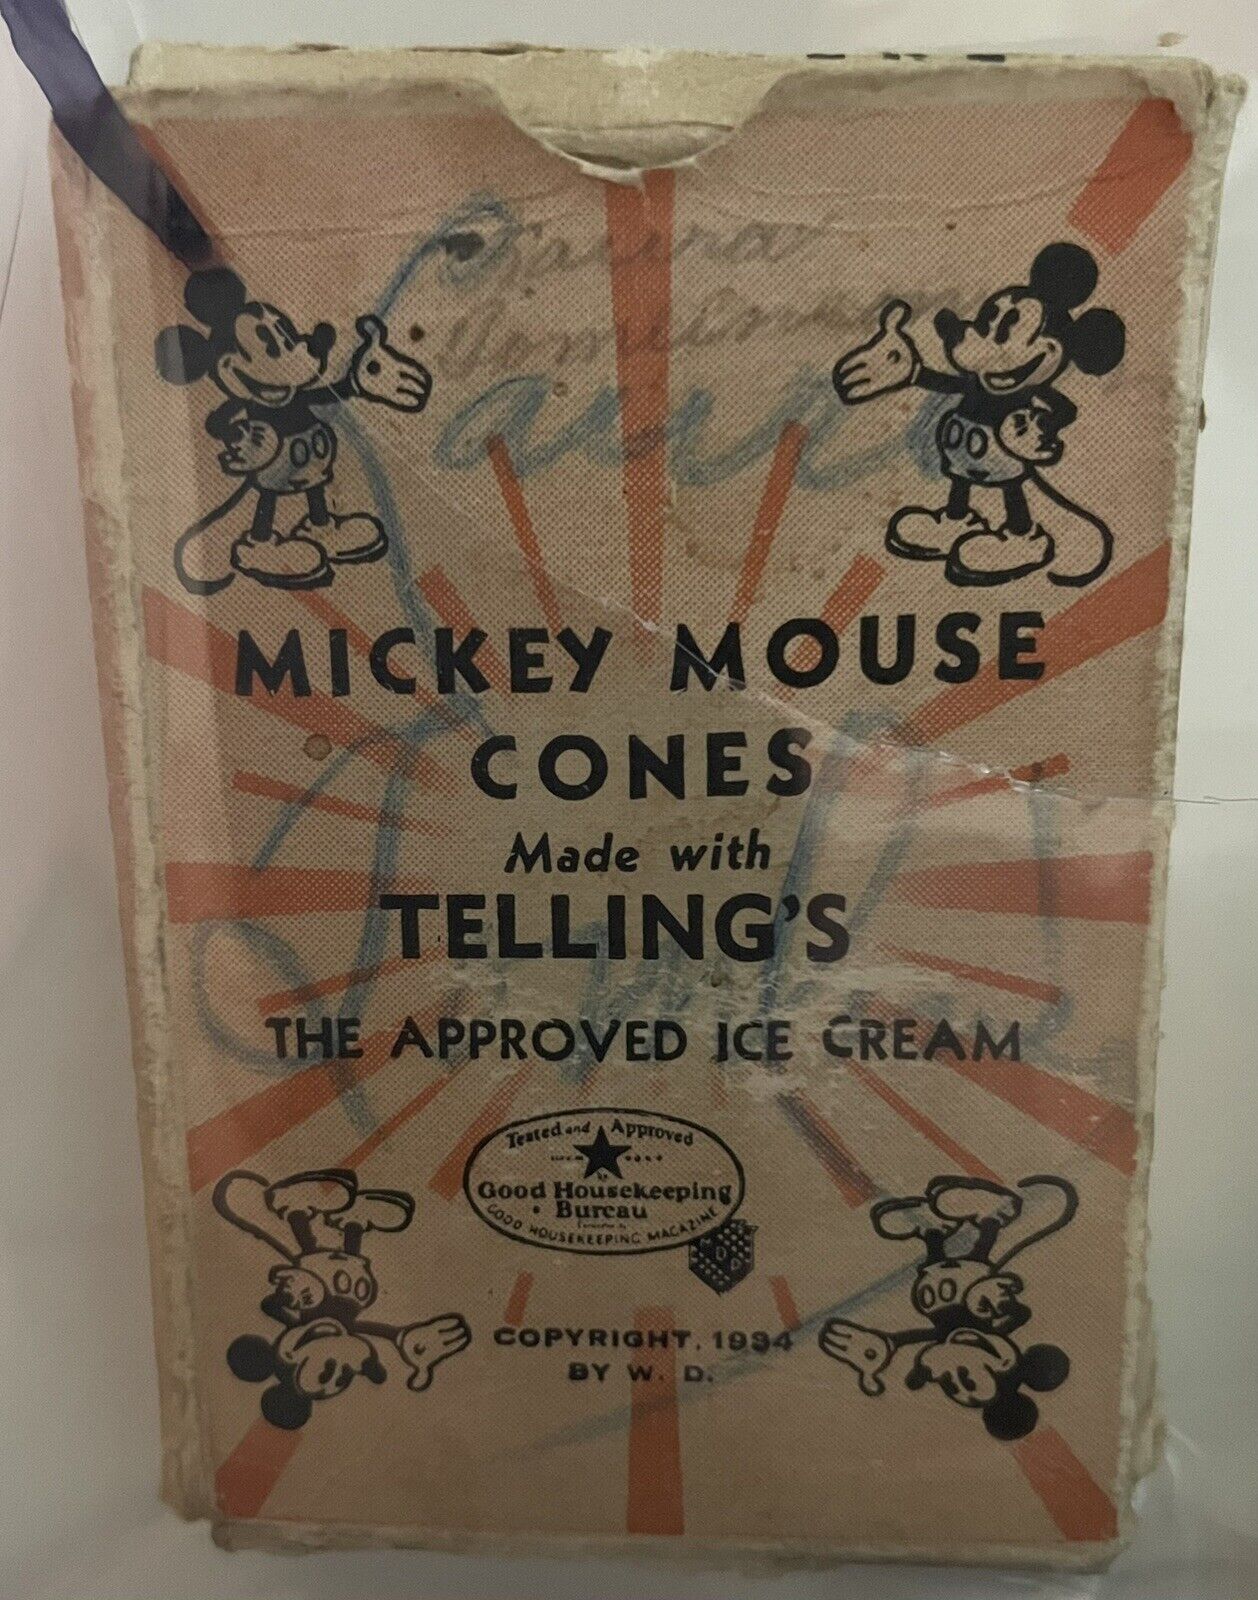 1934 Disney Mickey Mouse Three Little Pigs Telling’s Ice Cream Card Game